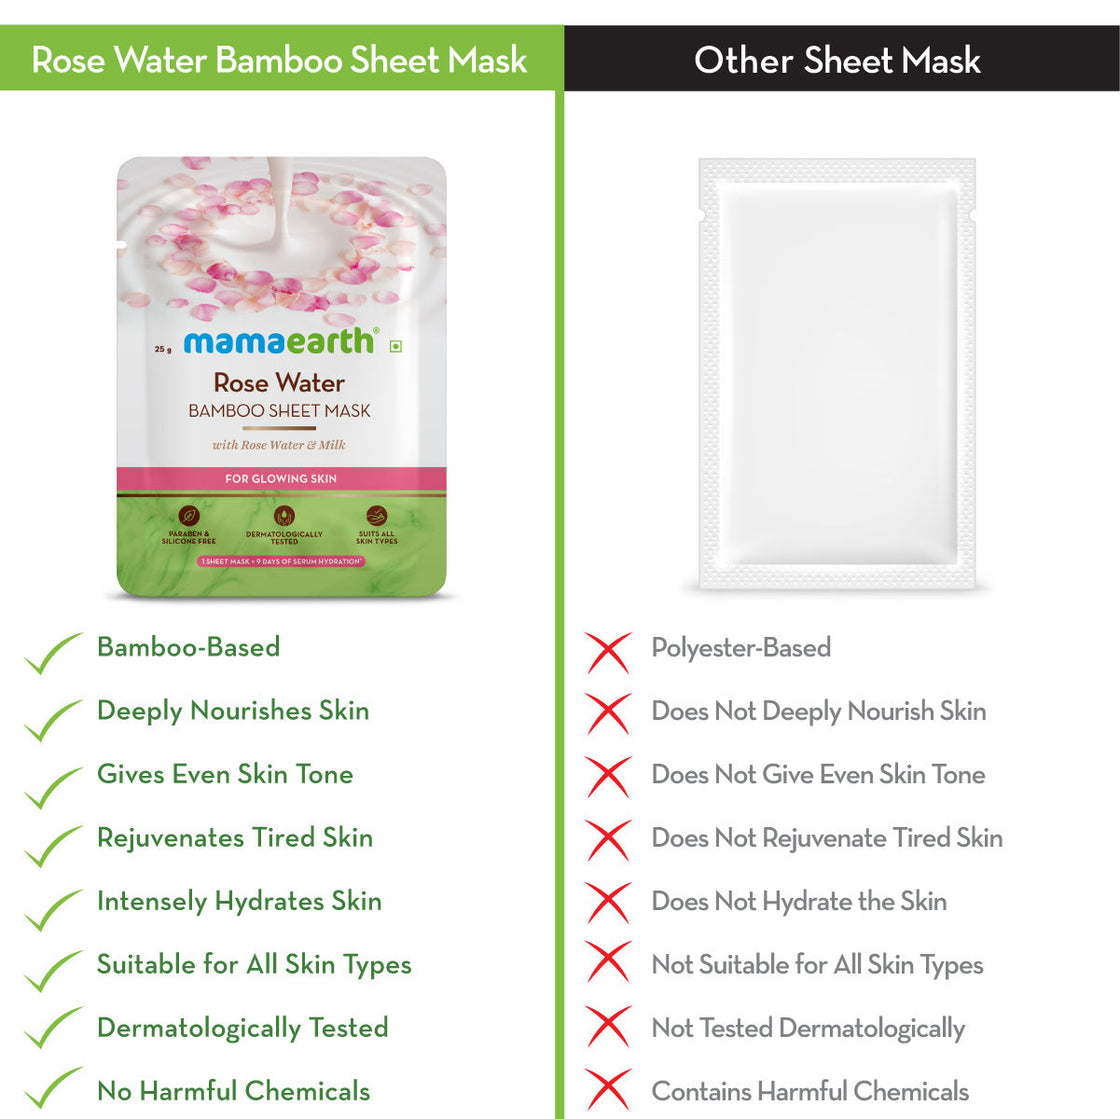 Mamaearth Rose Water Bamboo Sheet Mask With Rose Water & Milk For Glowing Skin-5